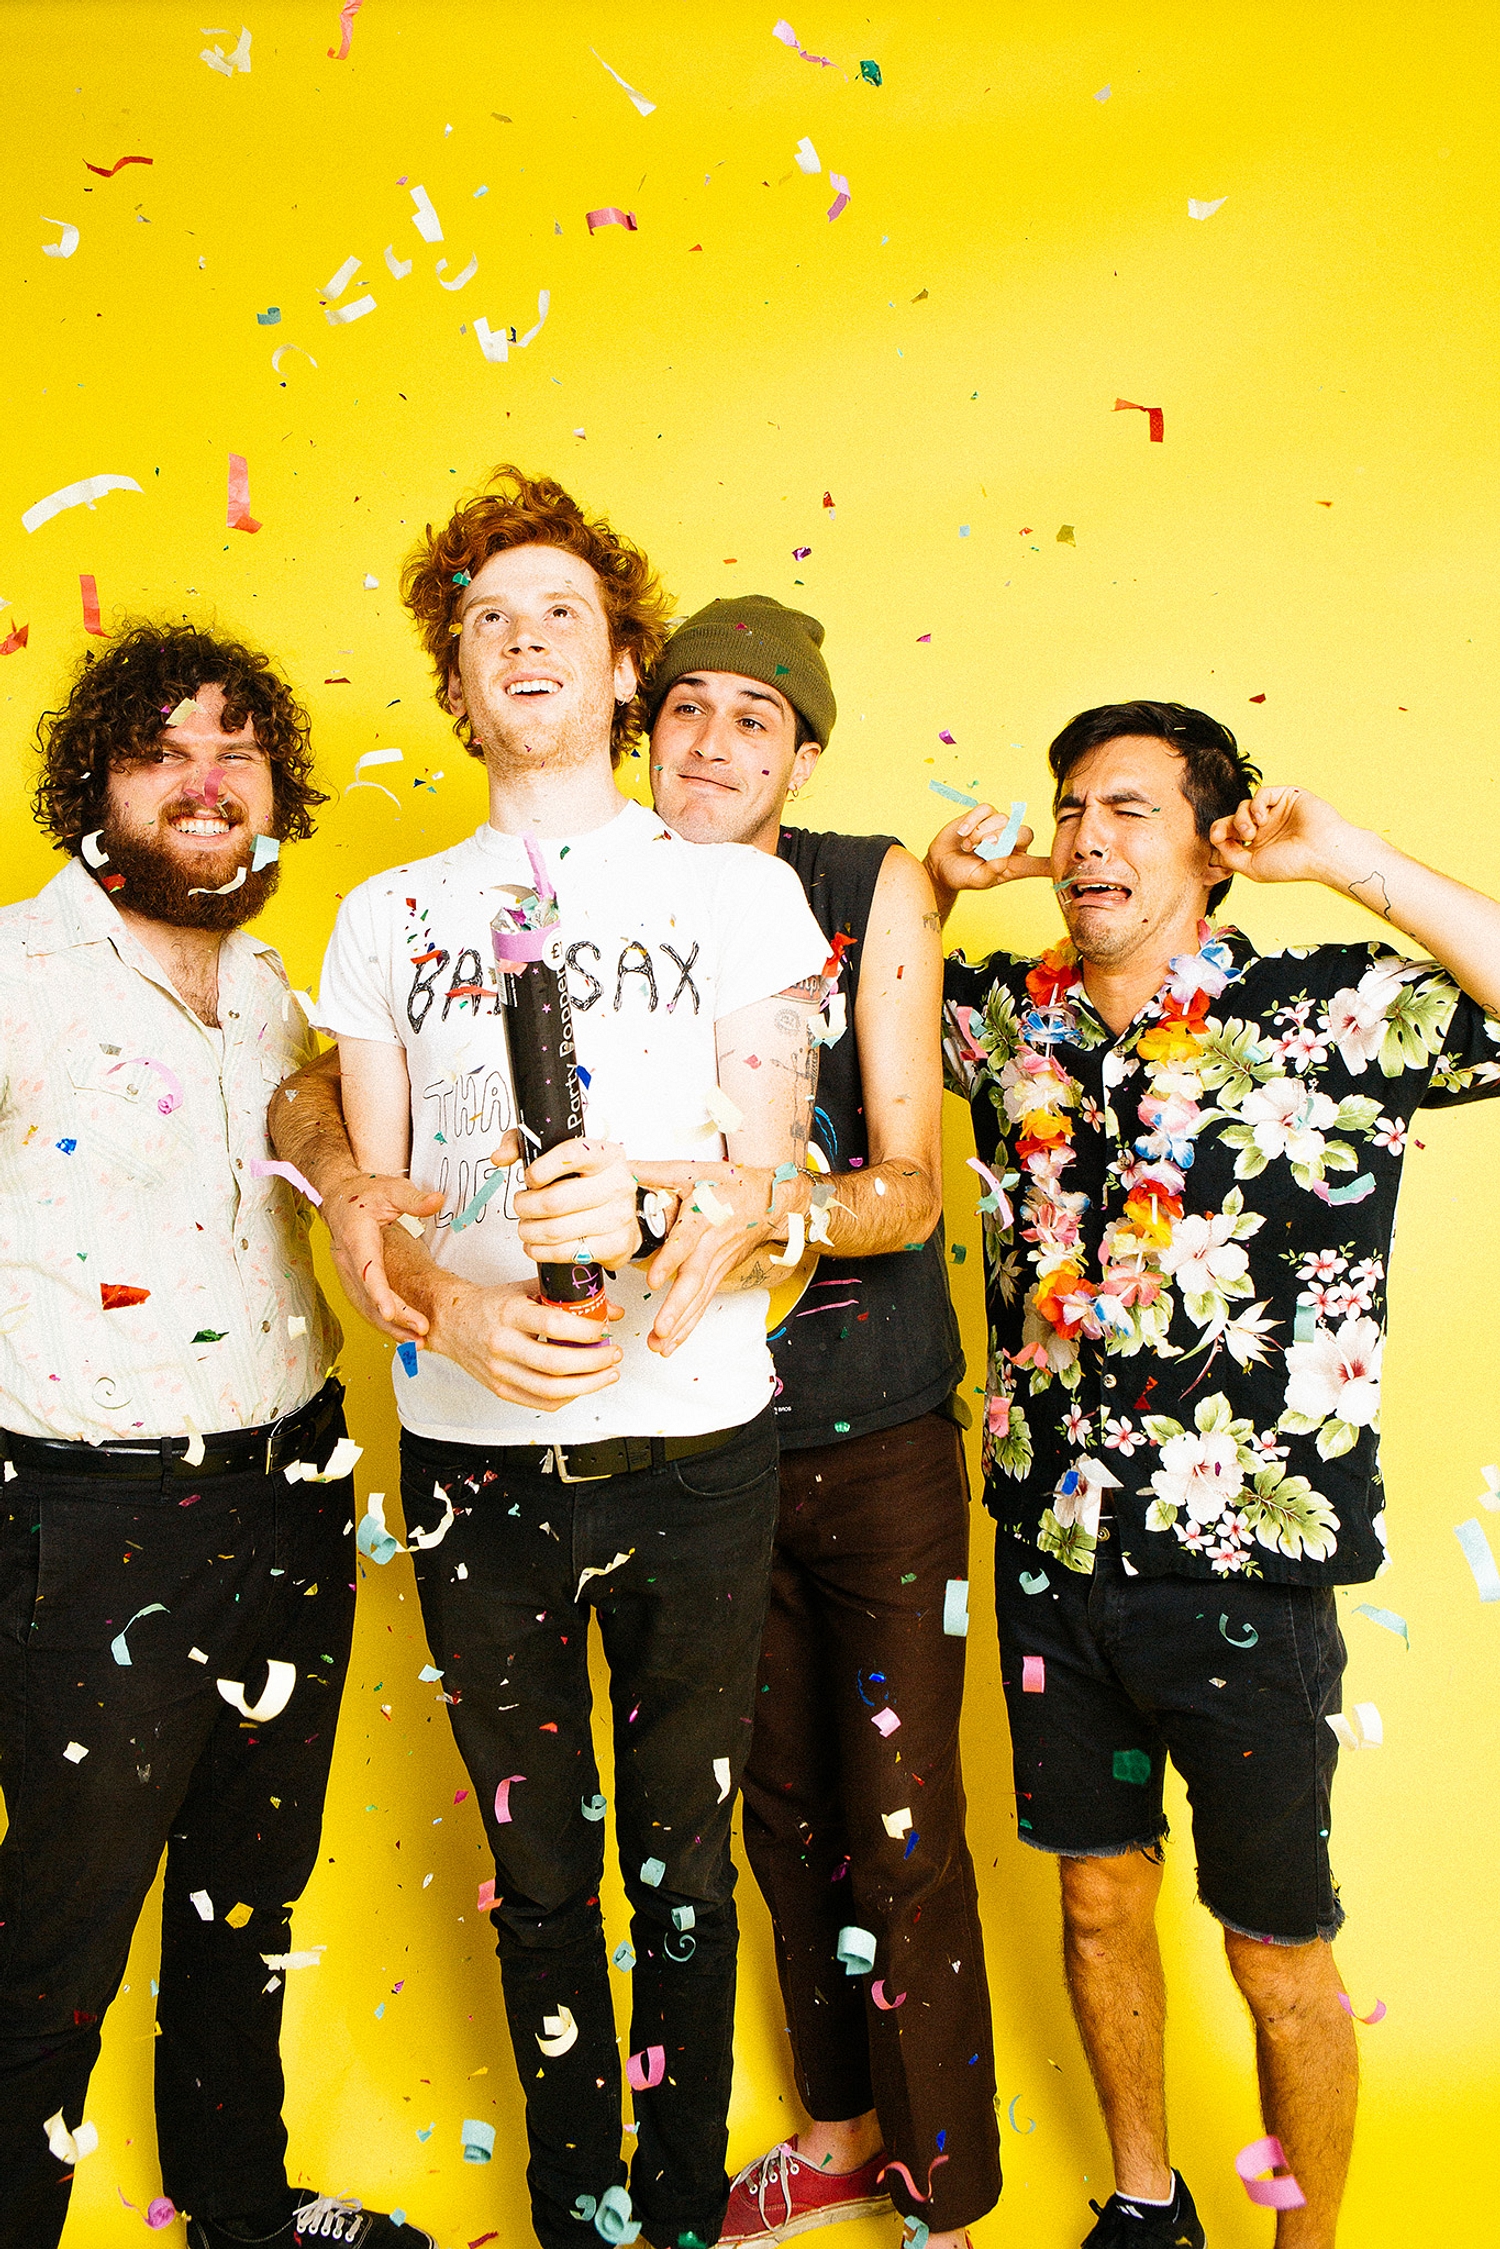 FIDLAR: "Just do whatever you want. If you wanna try it, fucking try it"